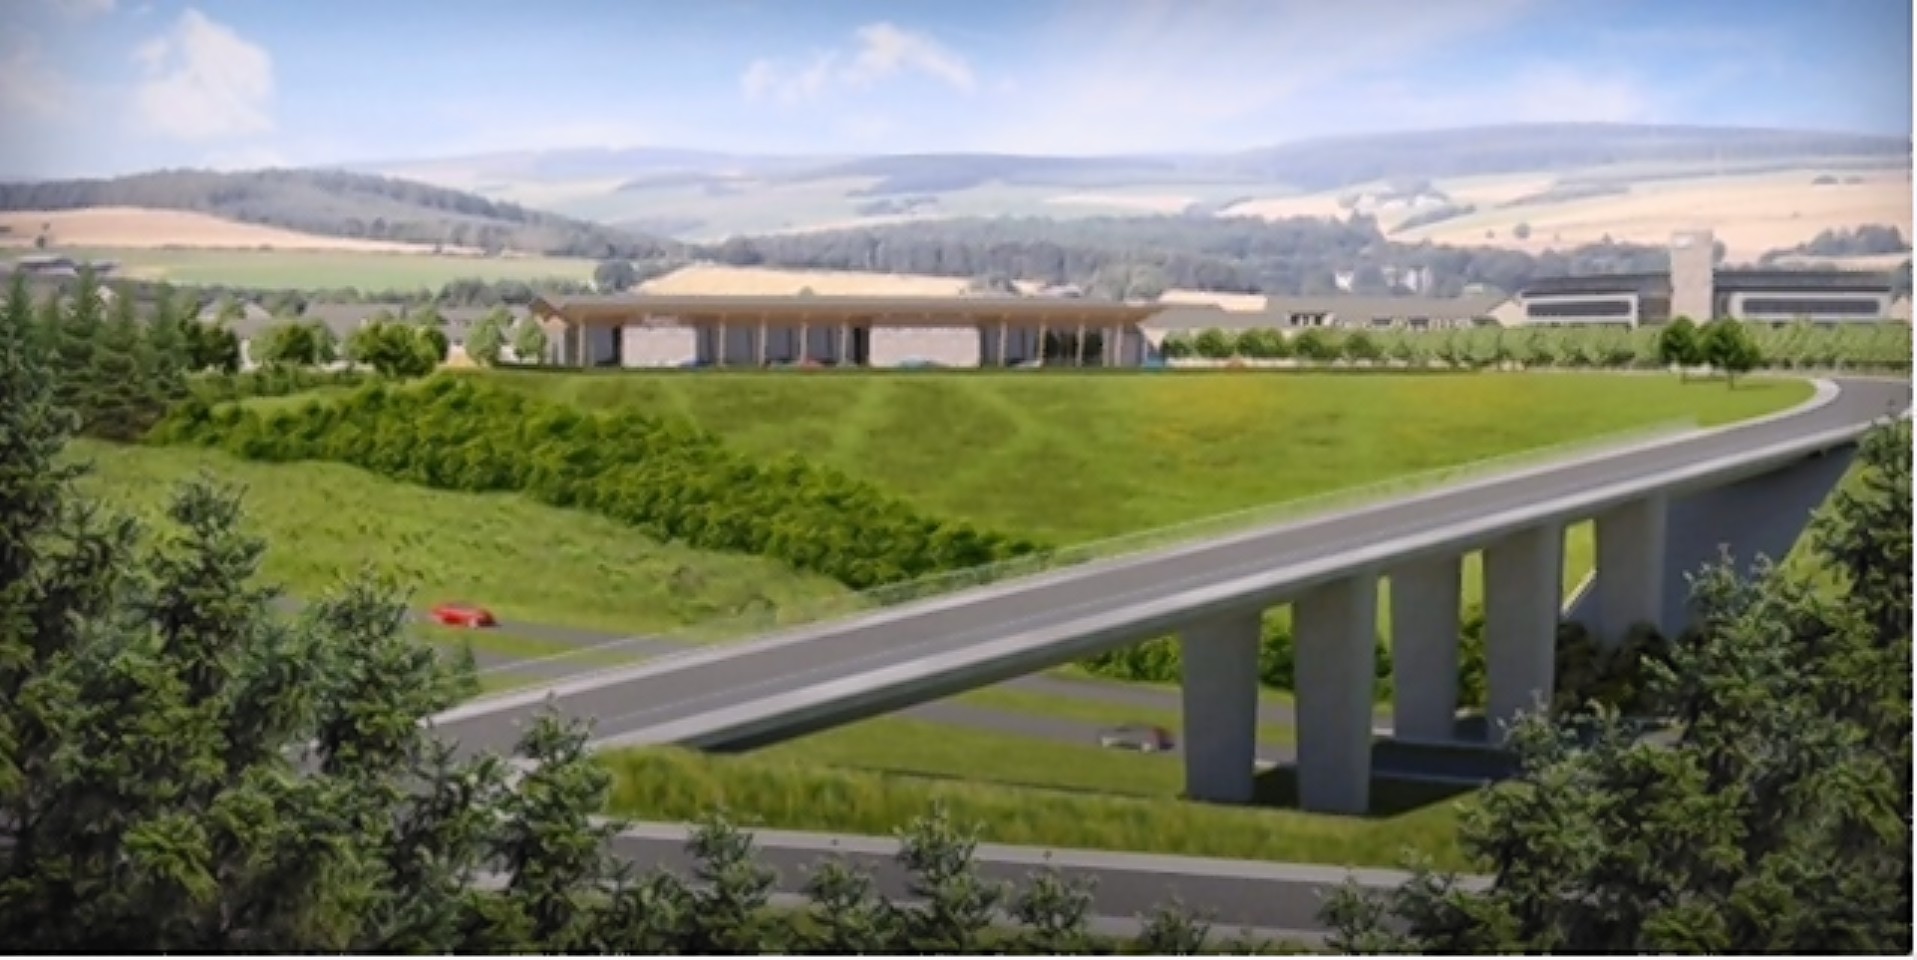 A new road bridge over the A90 is included in the plans